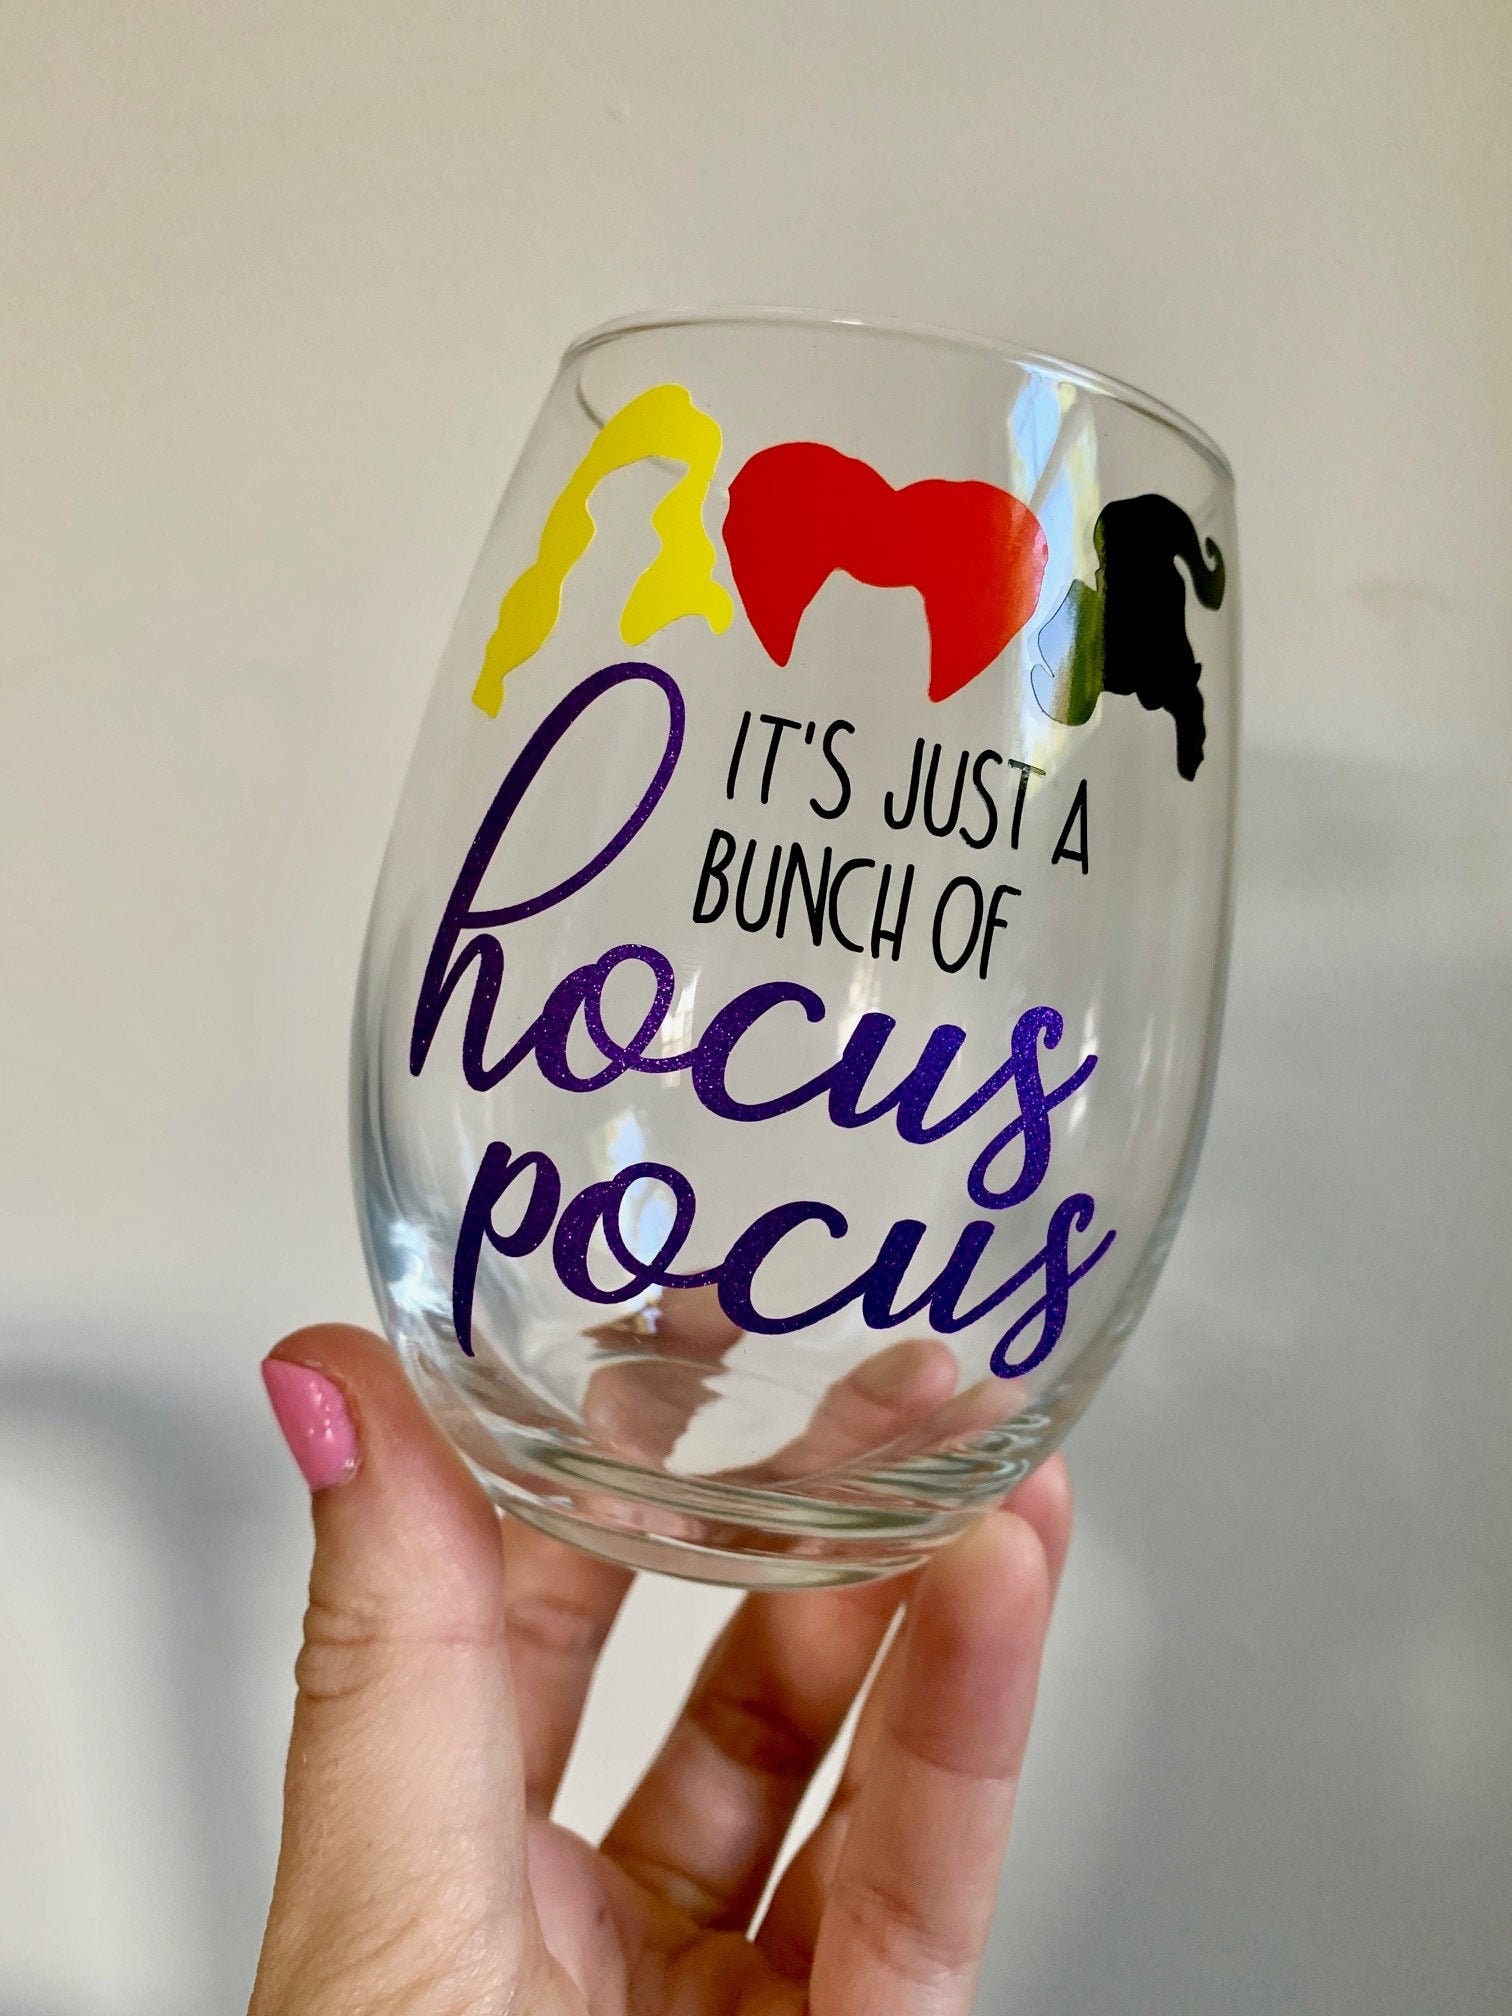 It's Just A Bunch Of Hocus Pocus - Family Personalized Custom